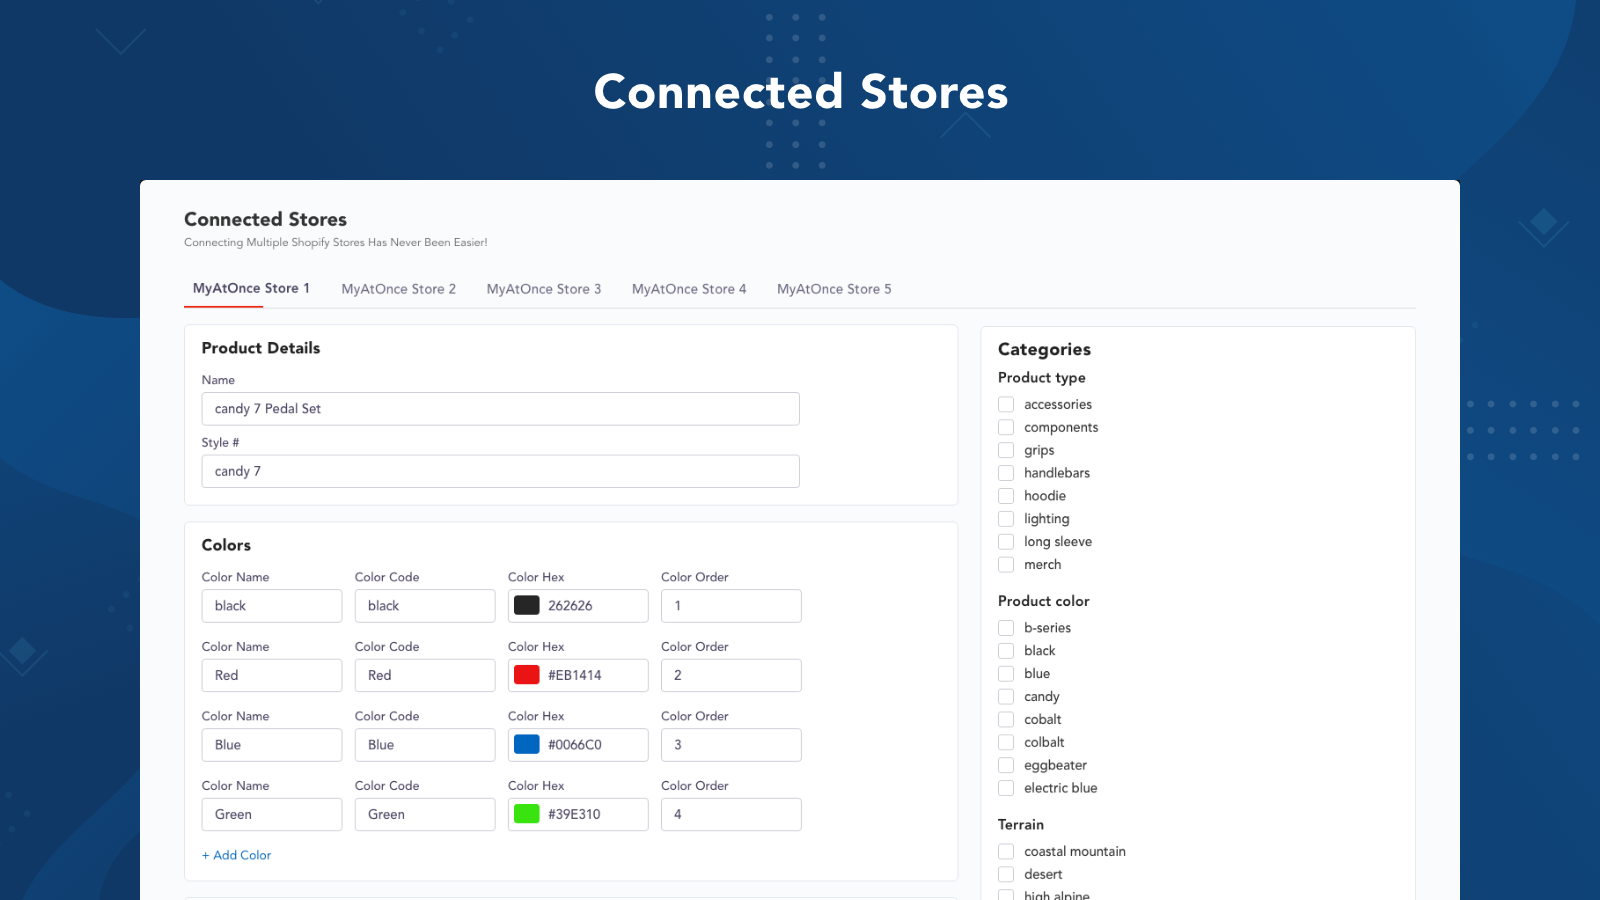 Connected Stores